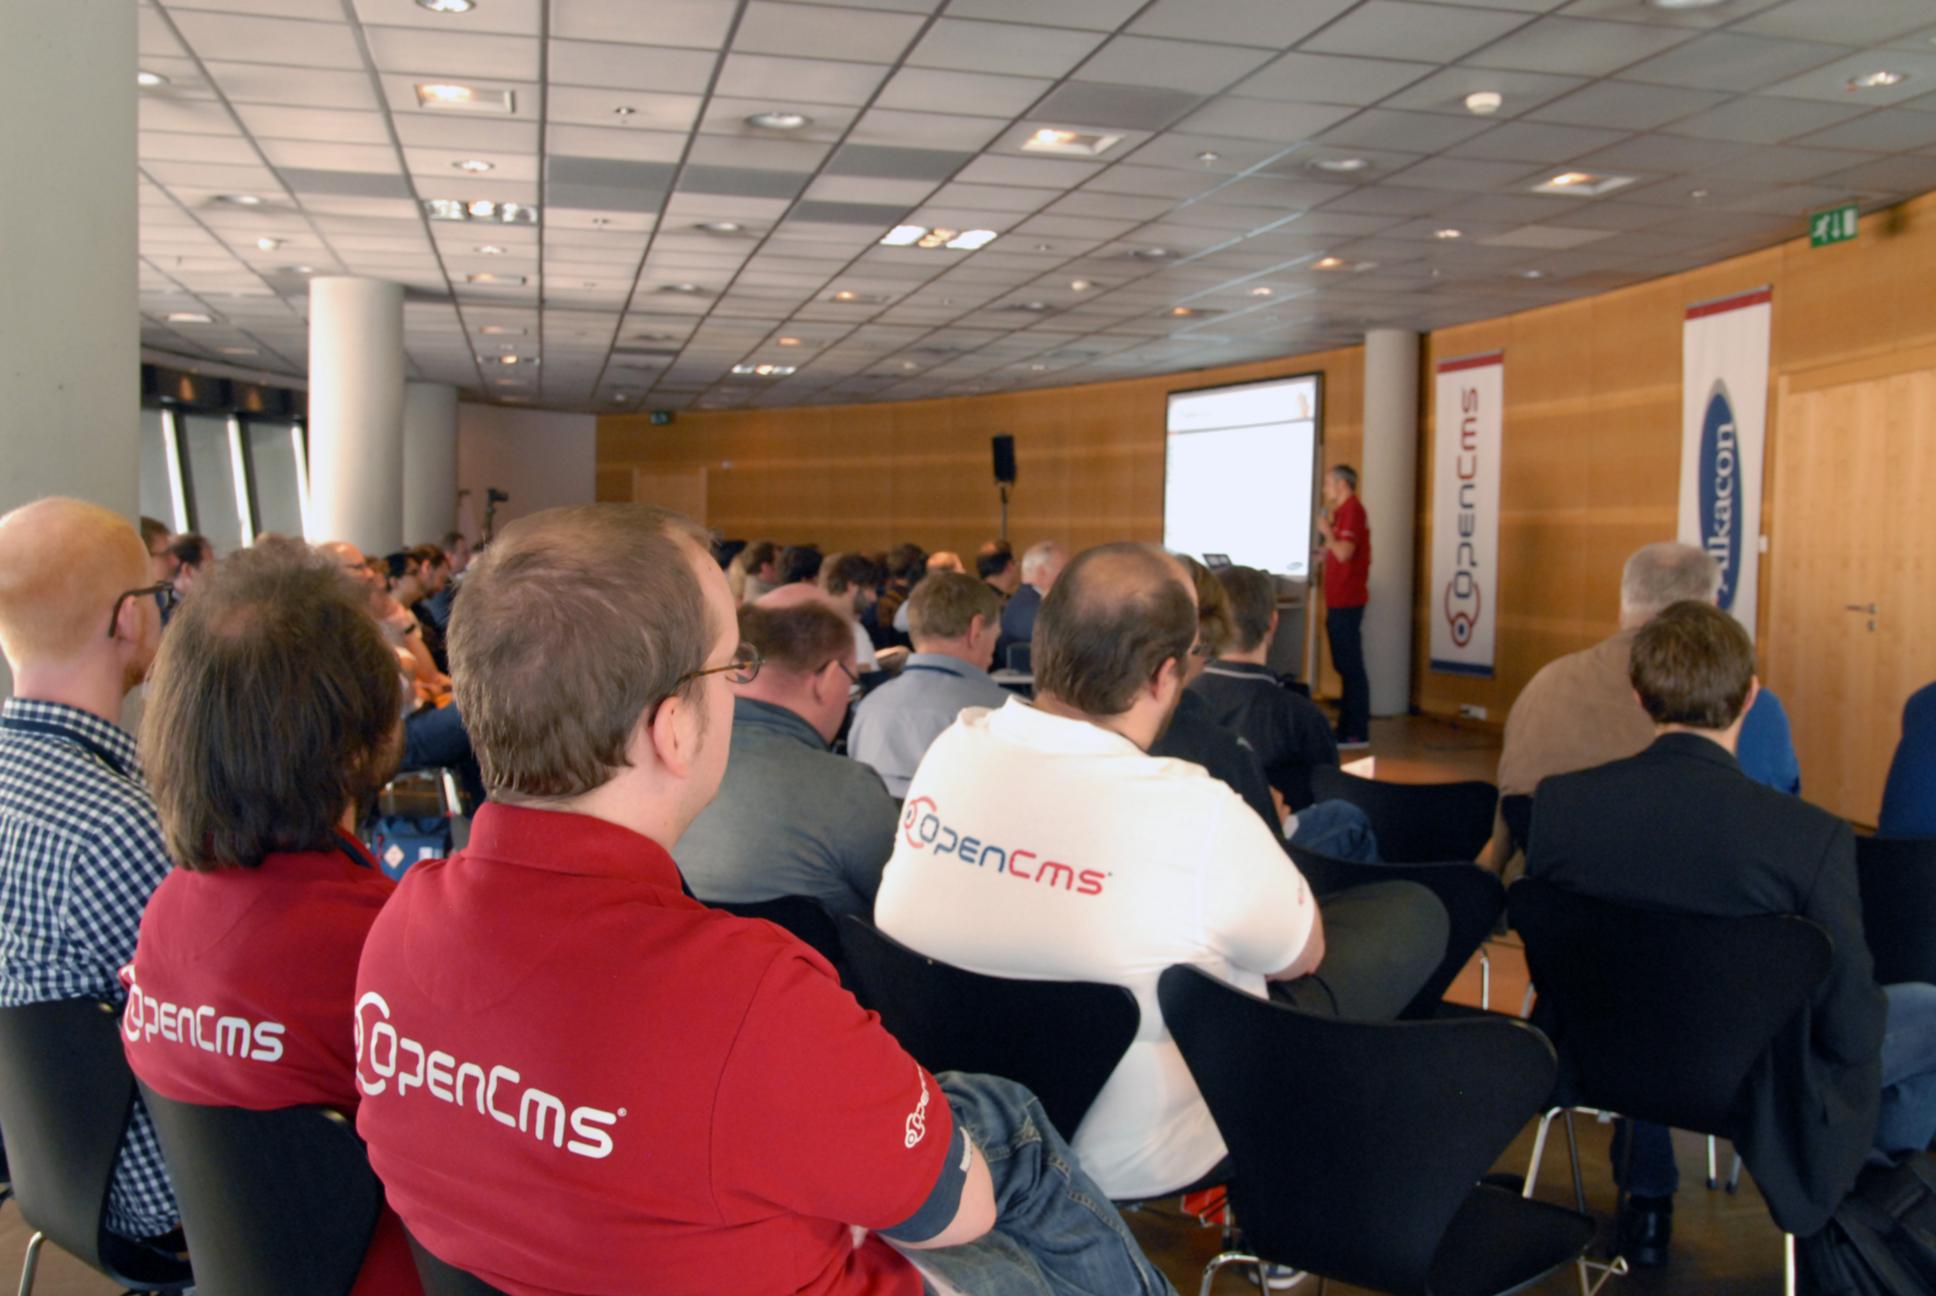 OpenCms Workshops and training courses